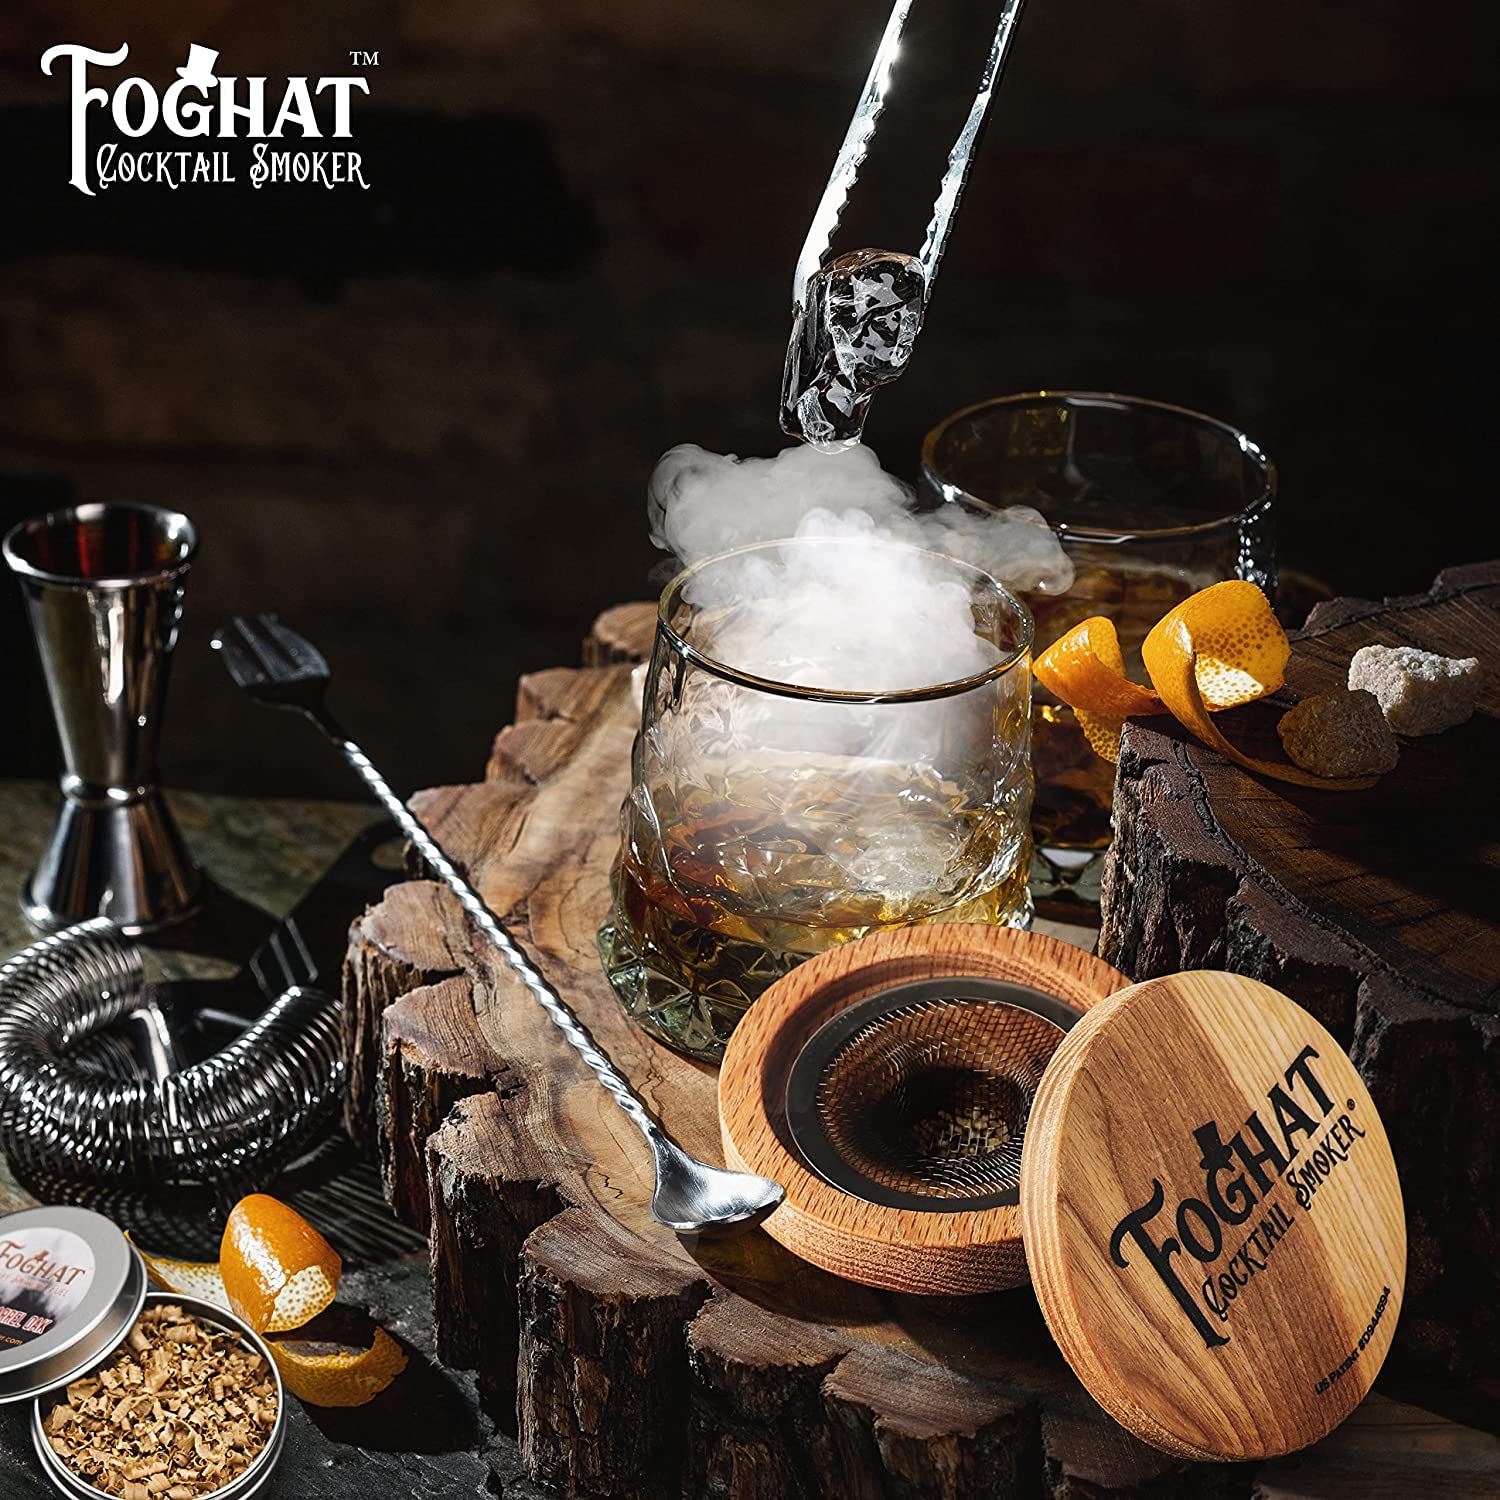 The Foghat Cocktail Smoker and Old Fashioned Smoked Cocktail Kit with Torch (no Butane) w/Bourbon Barrel Oak Wood Chips (4oz) and Singlez Bar Old Fasioned Mix Packets - Whiskey Smoker Kit For Drinks